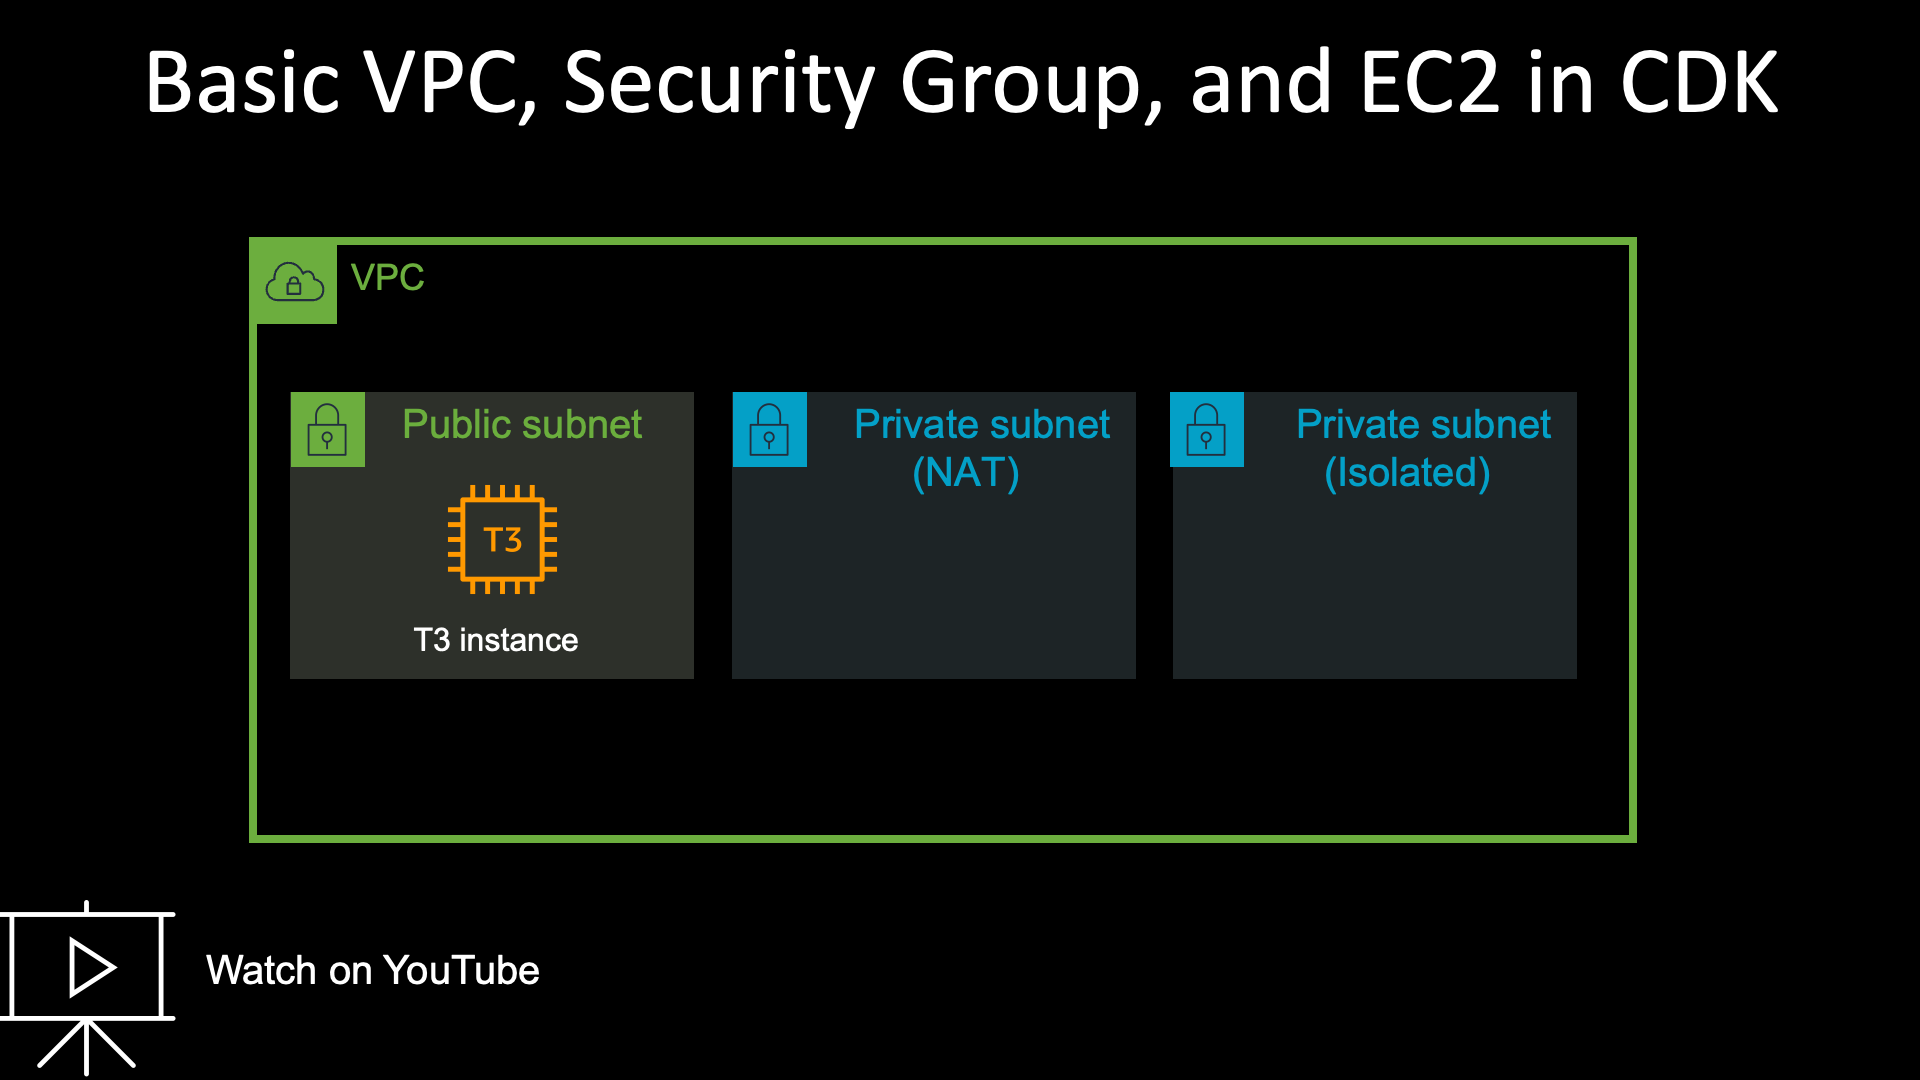 Basic VPC, Security Group, and EC2